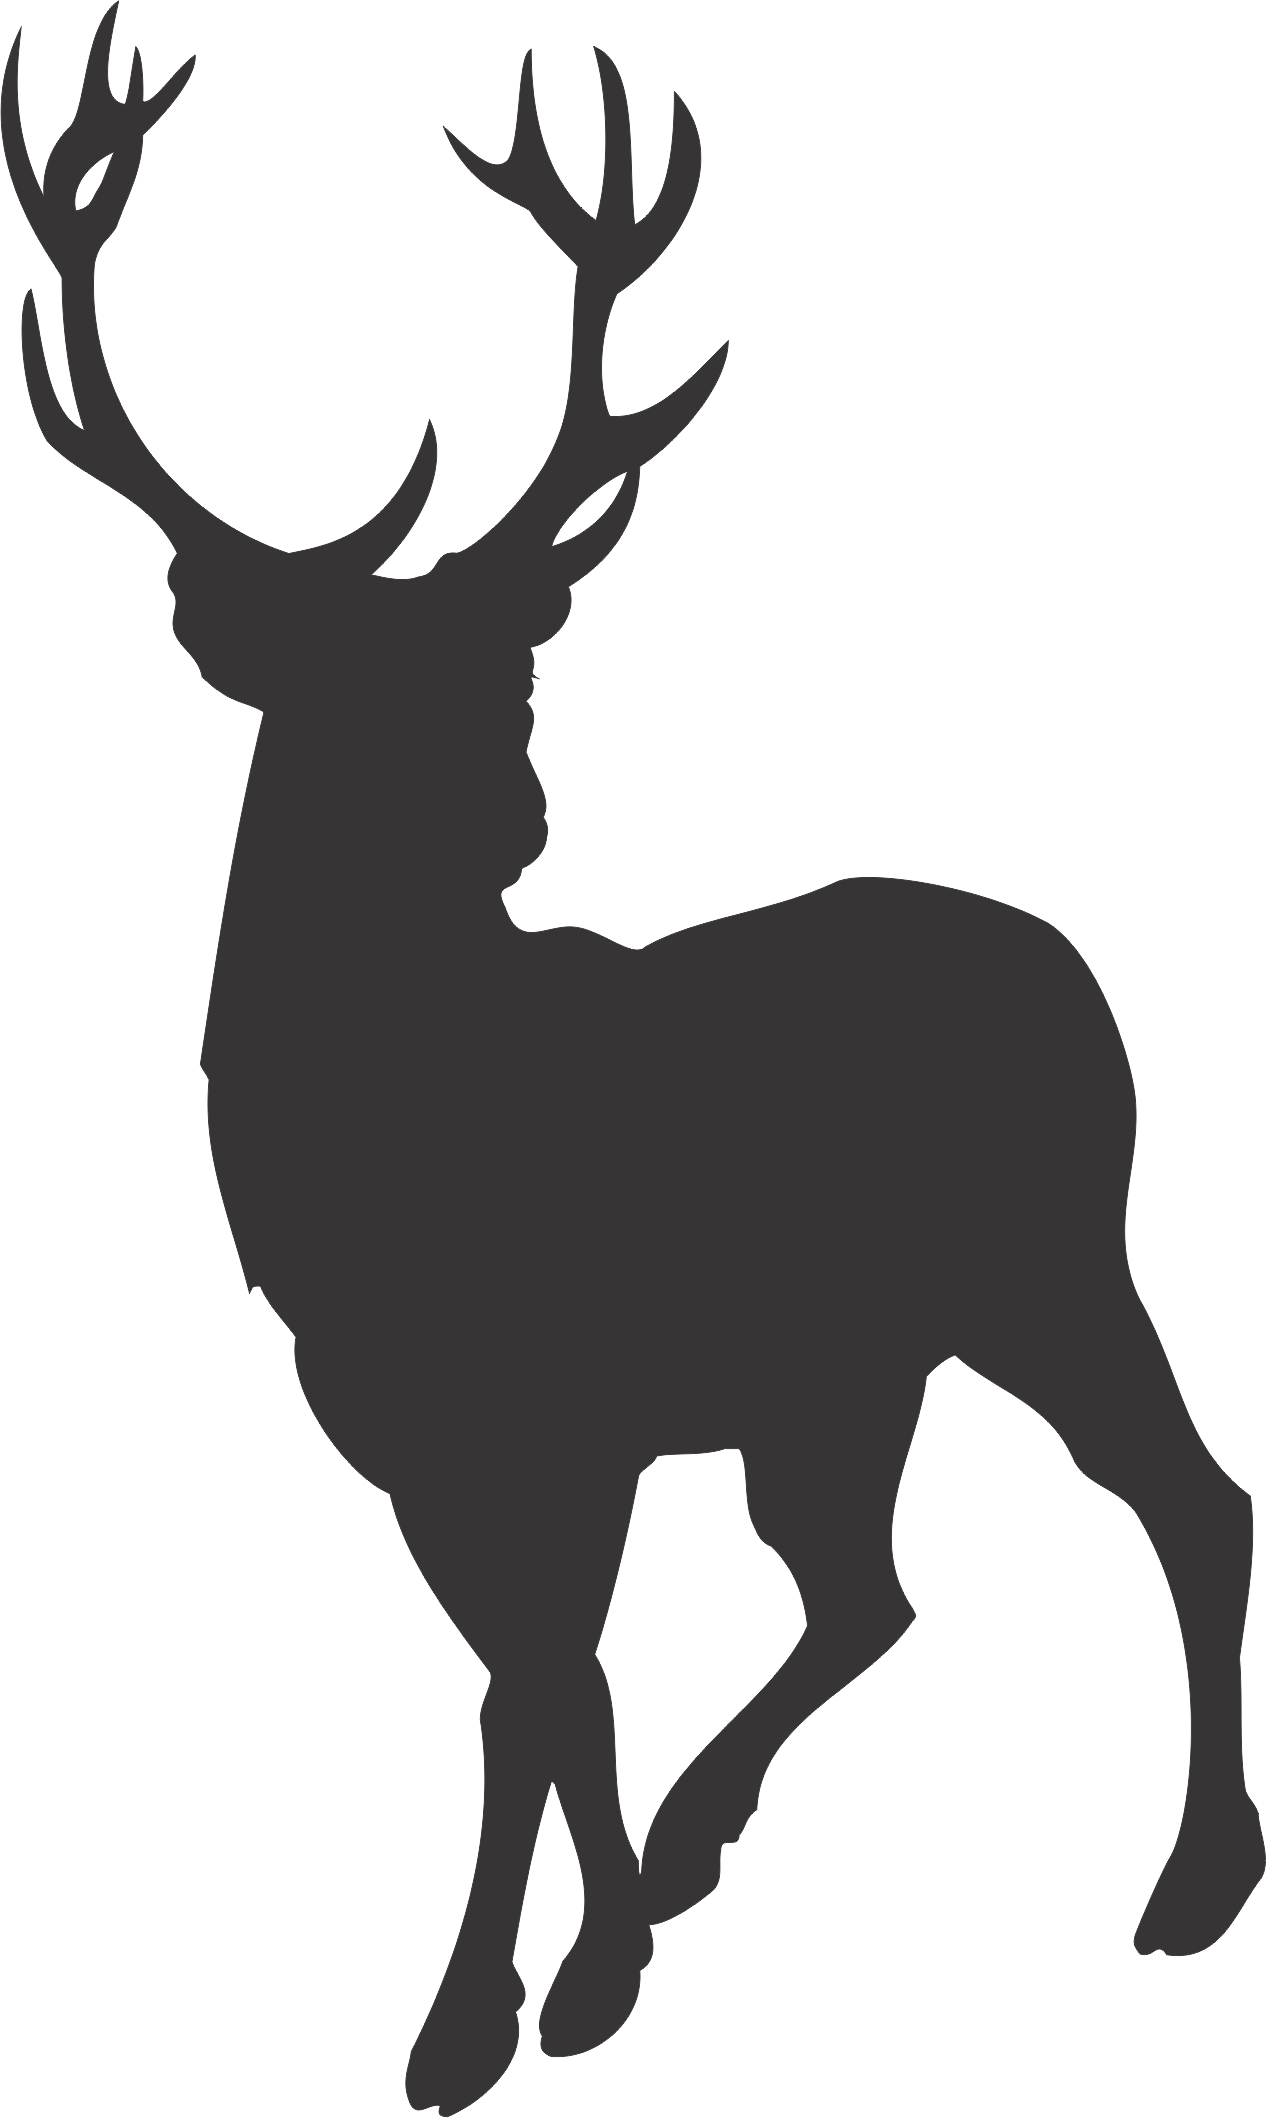 deer family head black and white clipart - Clipground